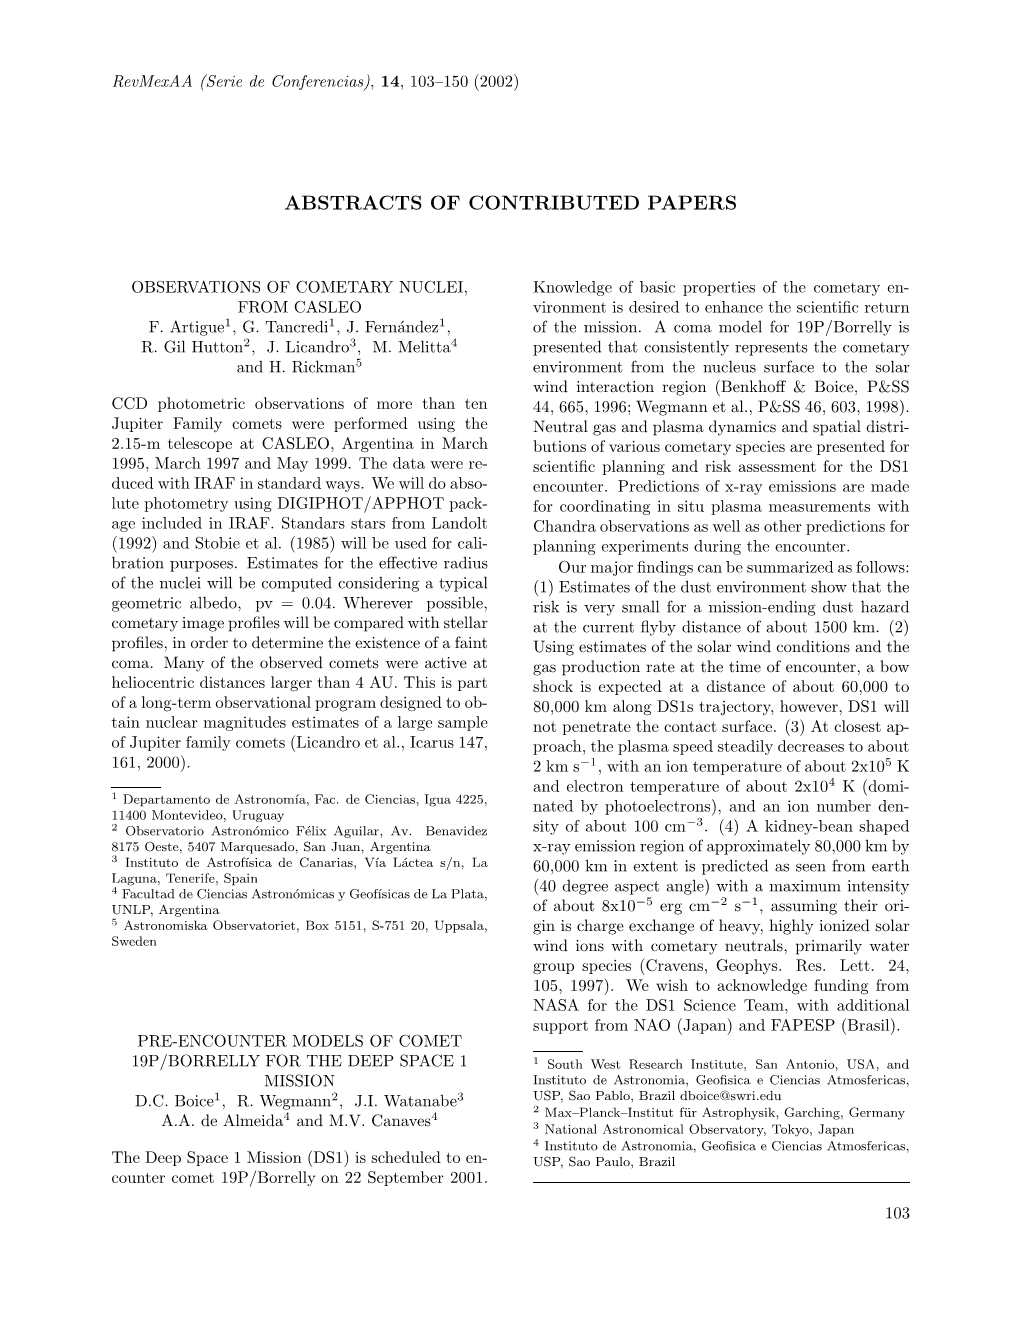 Abstracts of Contributed Papers